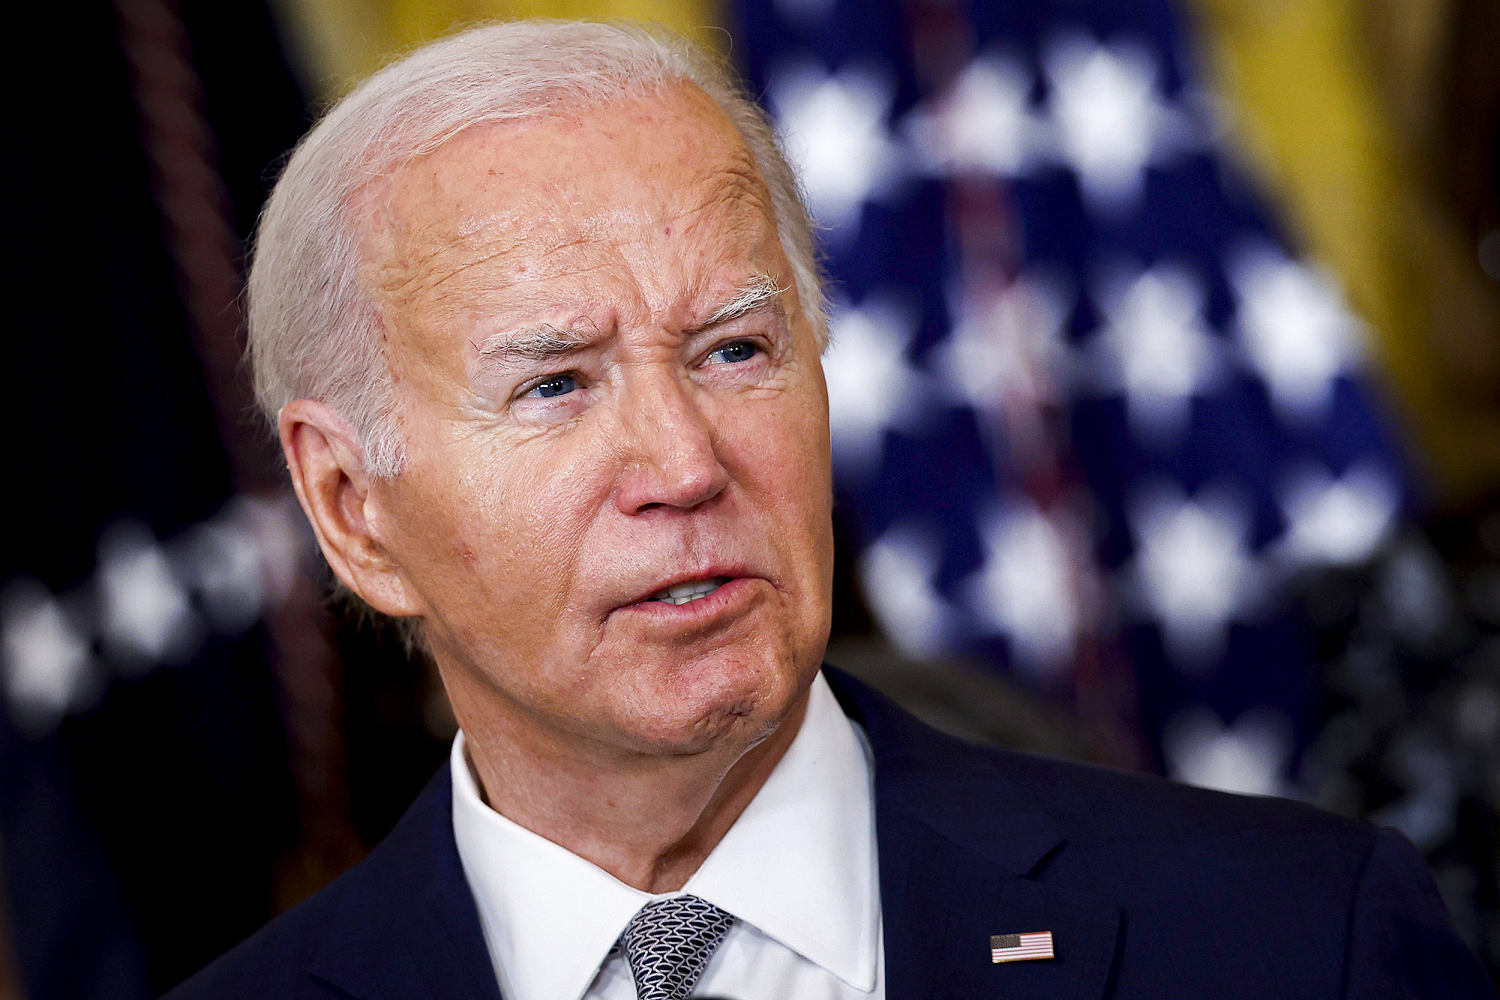 Biden campaign attempts to flip the age script with a flurry of unflattering Trump videos